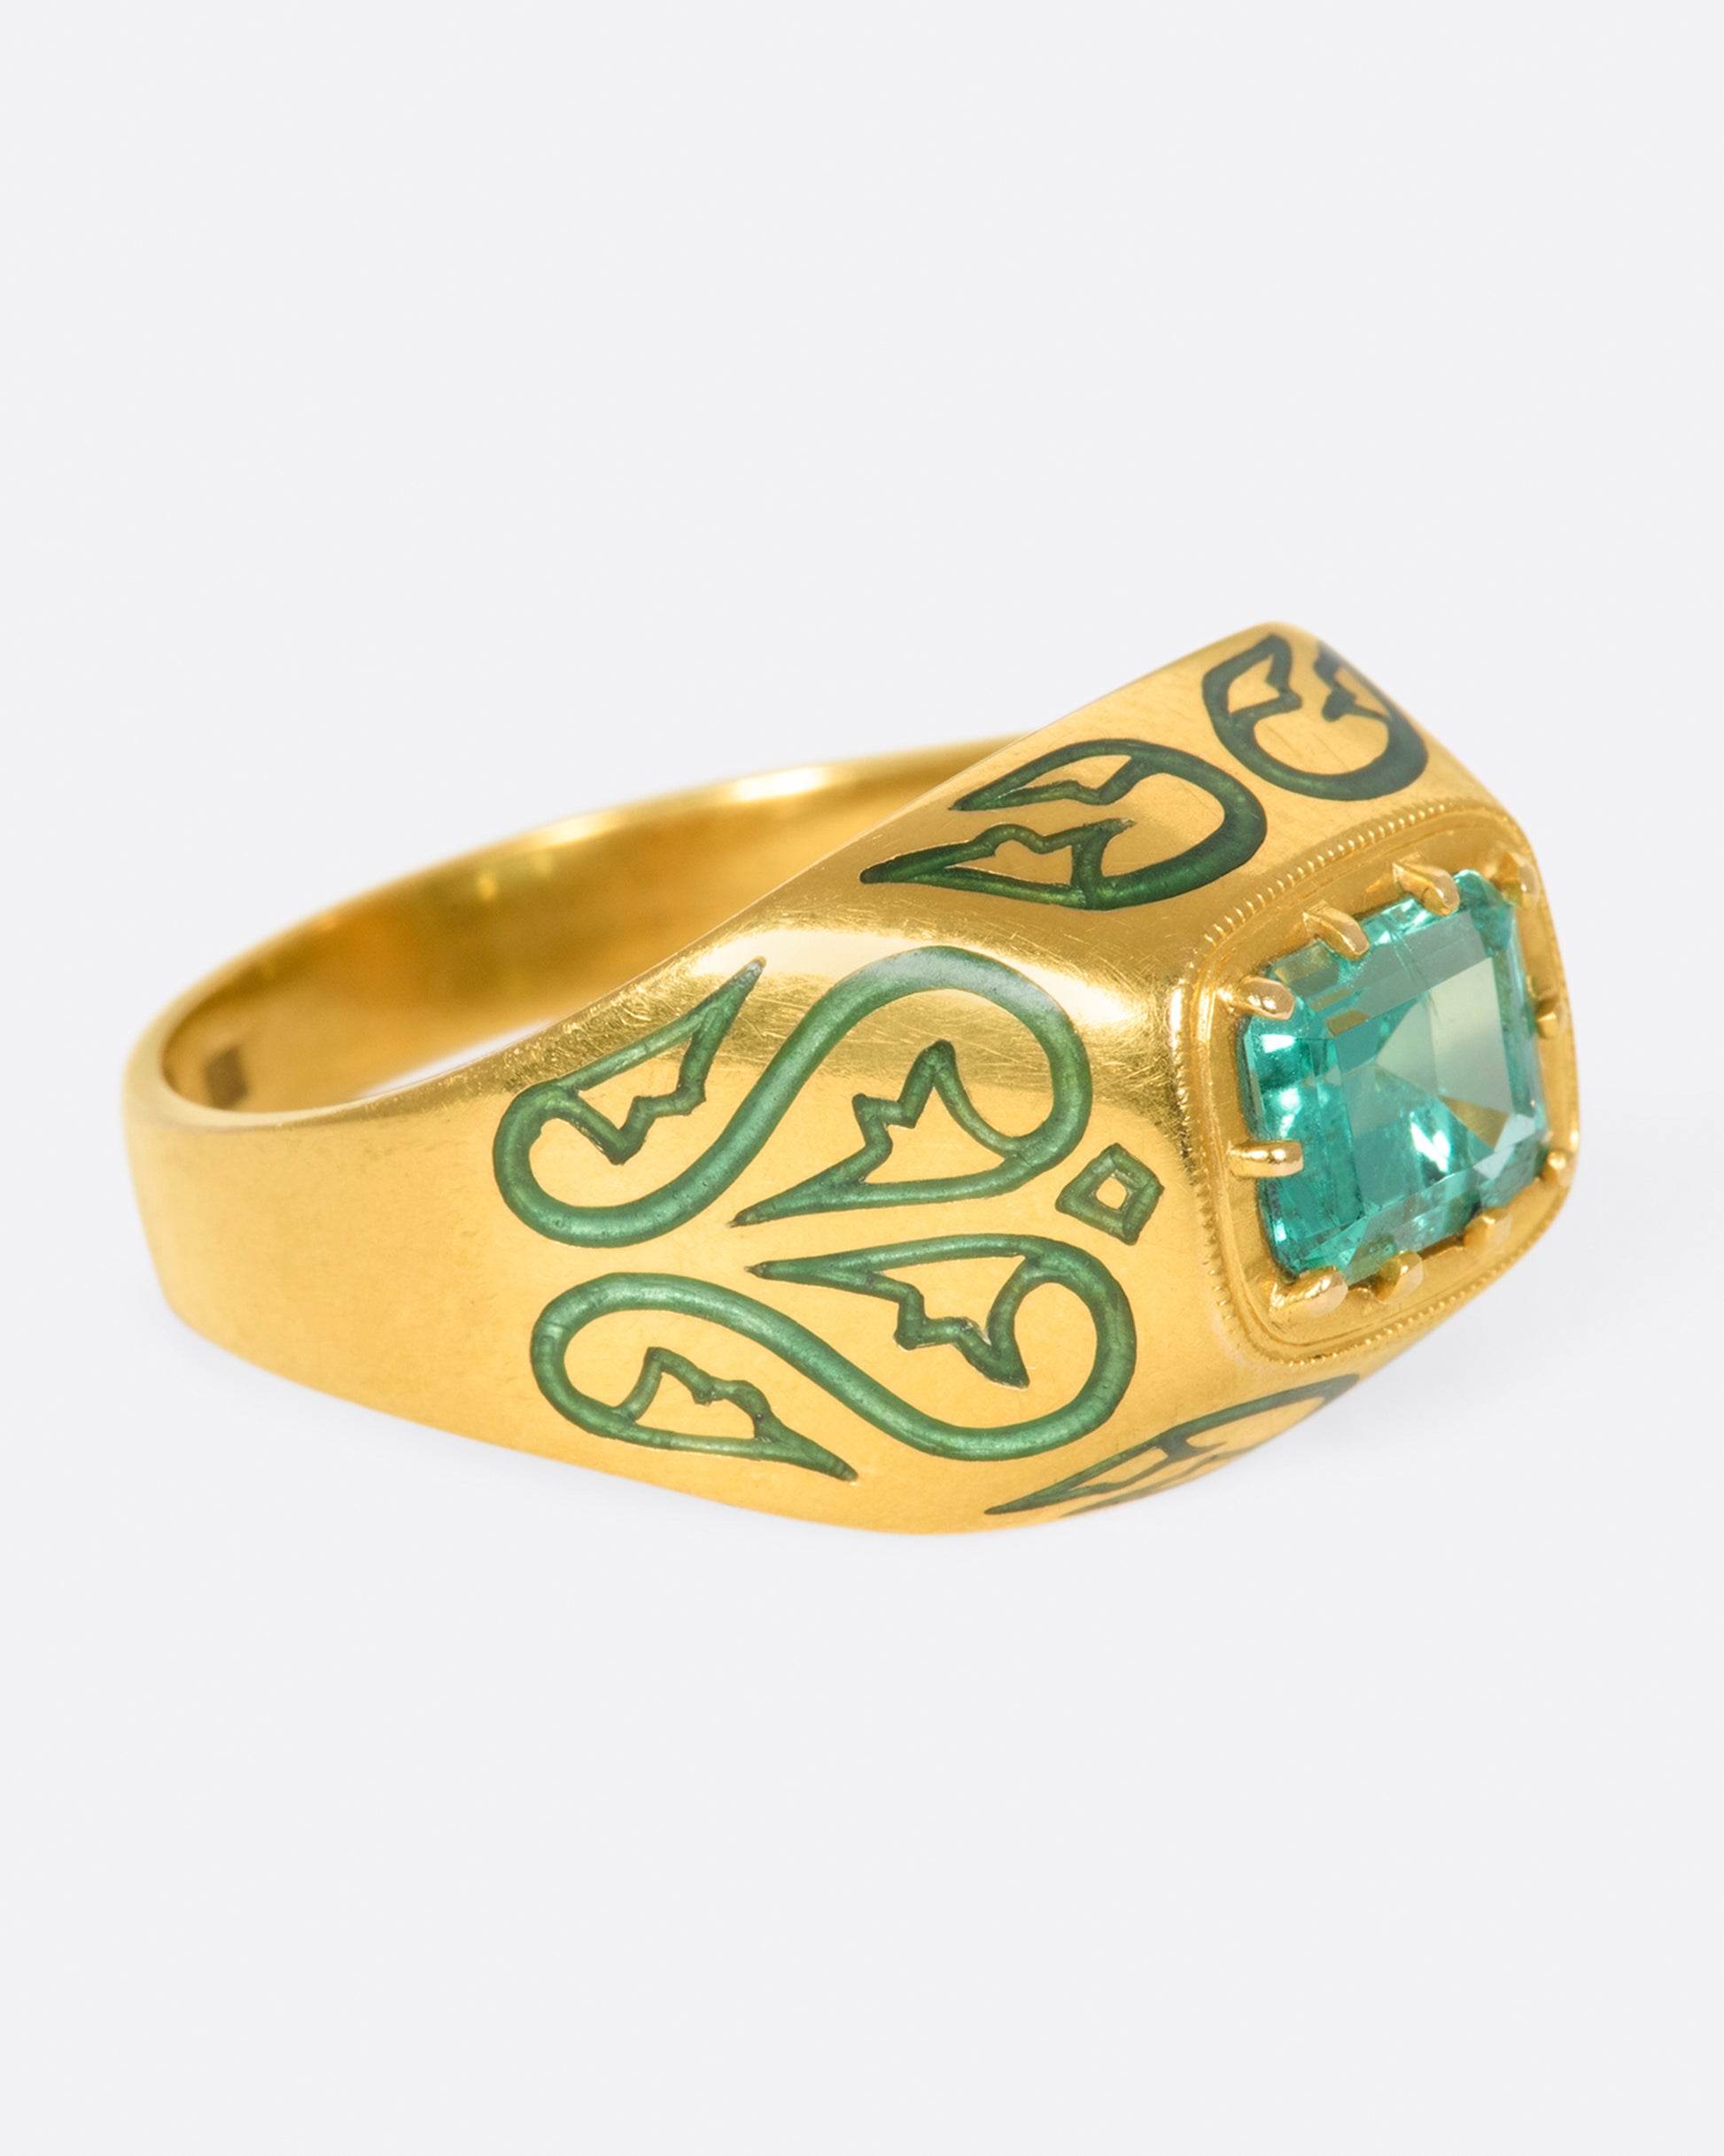 A gold ring featuring a bright Colombian emerald at its center and matching enamel details.